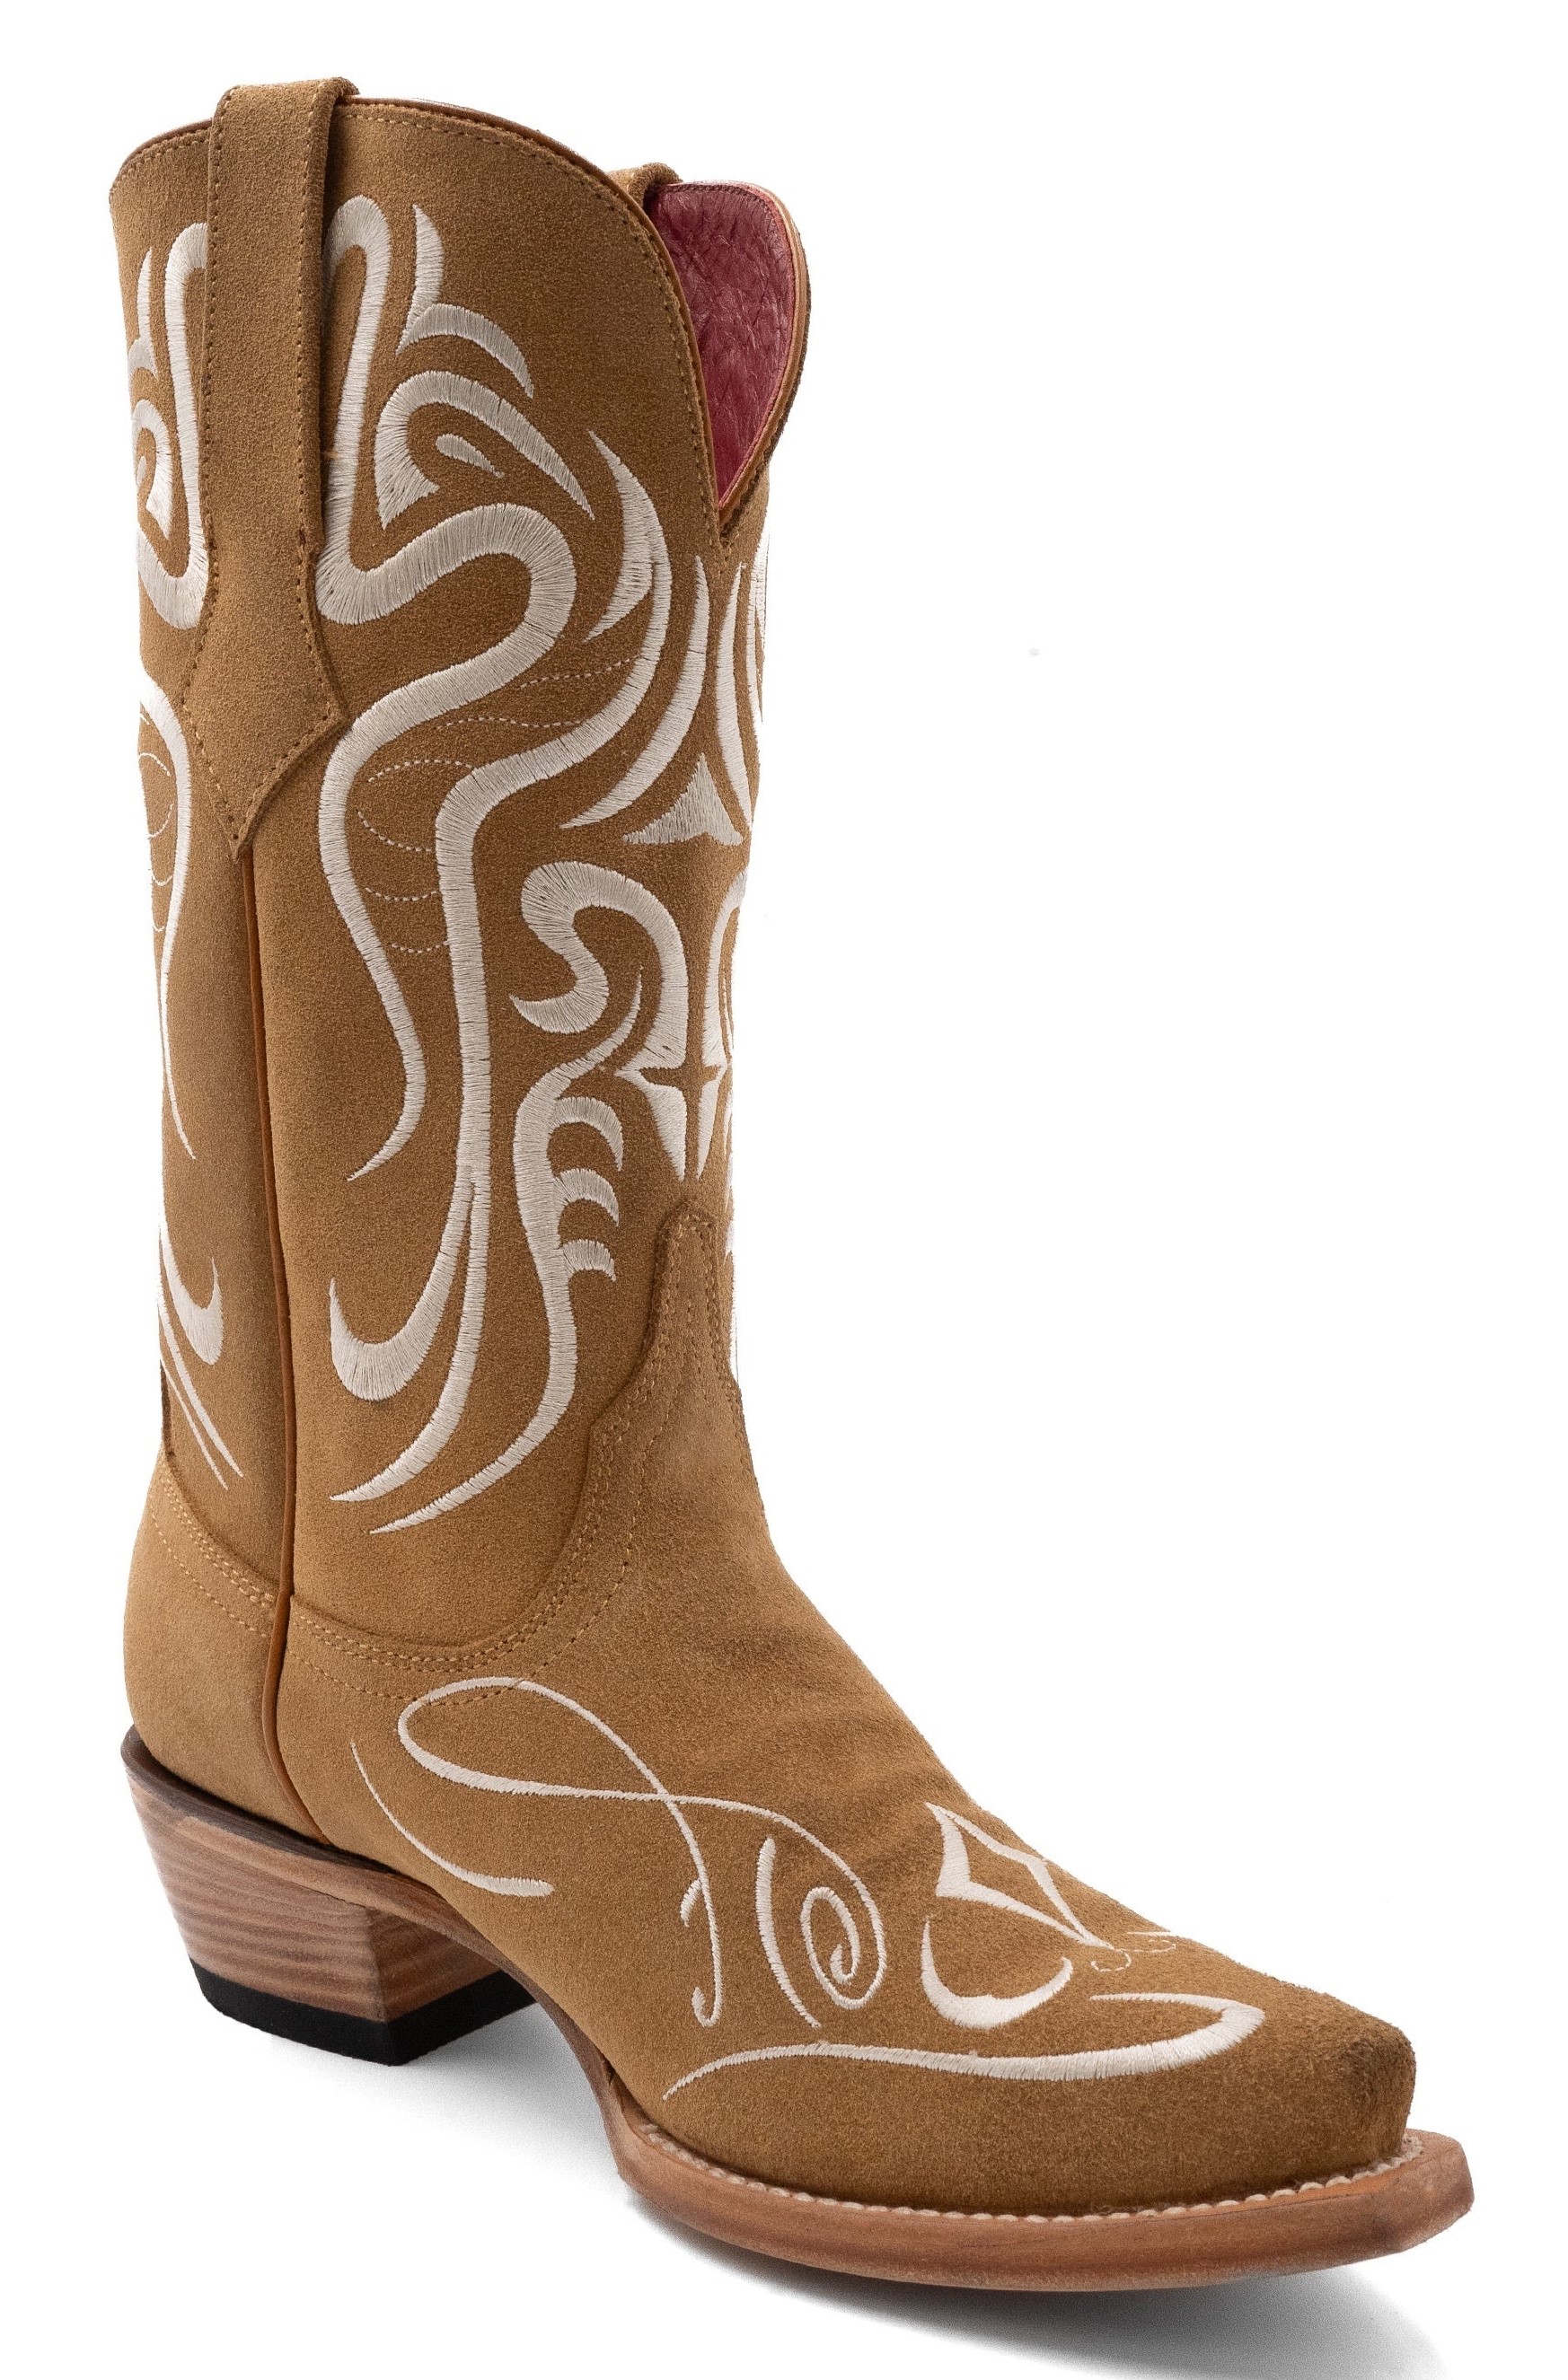 Ferrini Ladies "Belle" Sand Full Grain Leather Snipped Toe Cowgirl Boots 80961-30